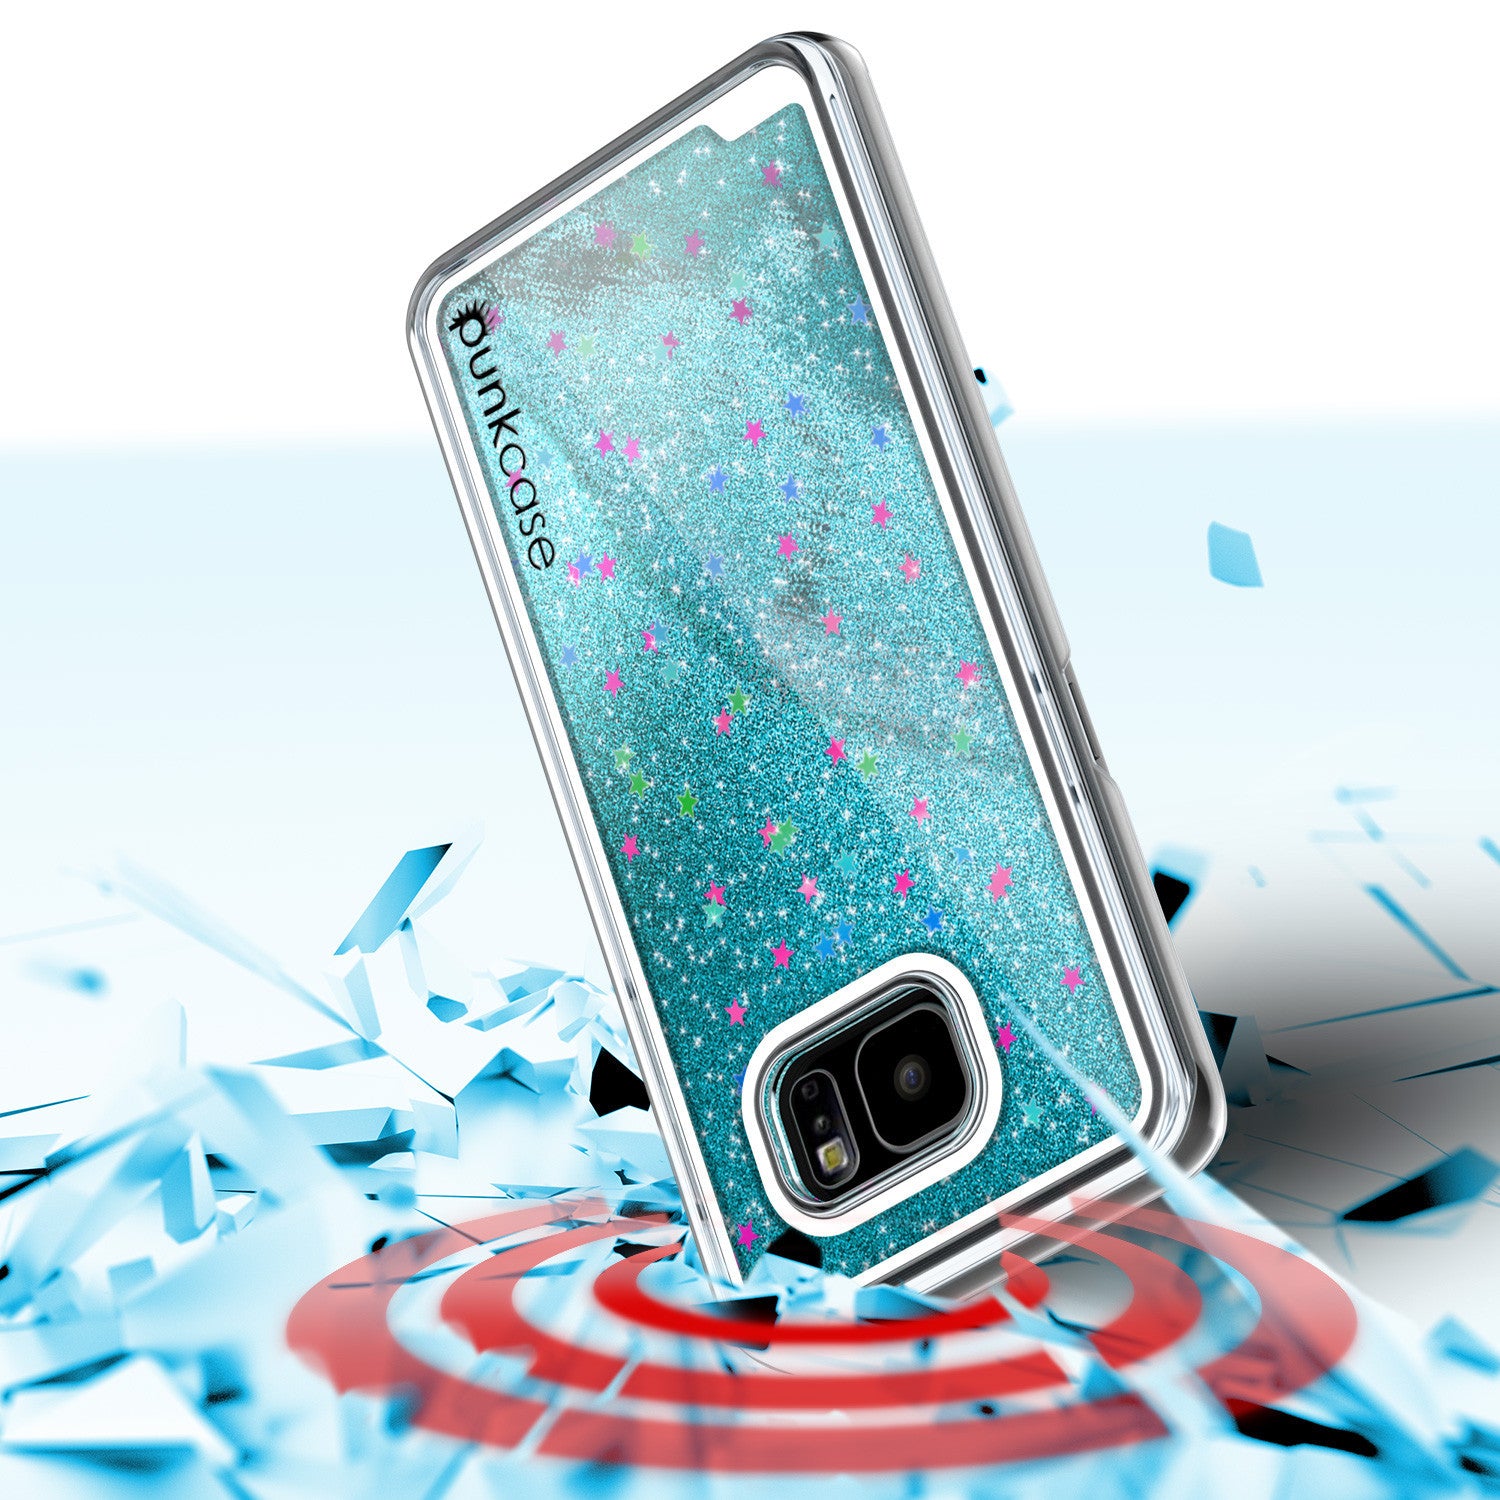 Samsung Galaxy S7 Edge Case, Punkcase [Liquid Teal Series] Protective Dual Layer Floating Glitter Cover + PunkShield Screen Protector